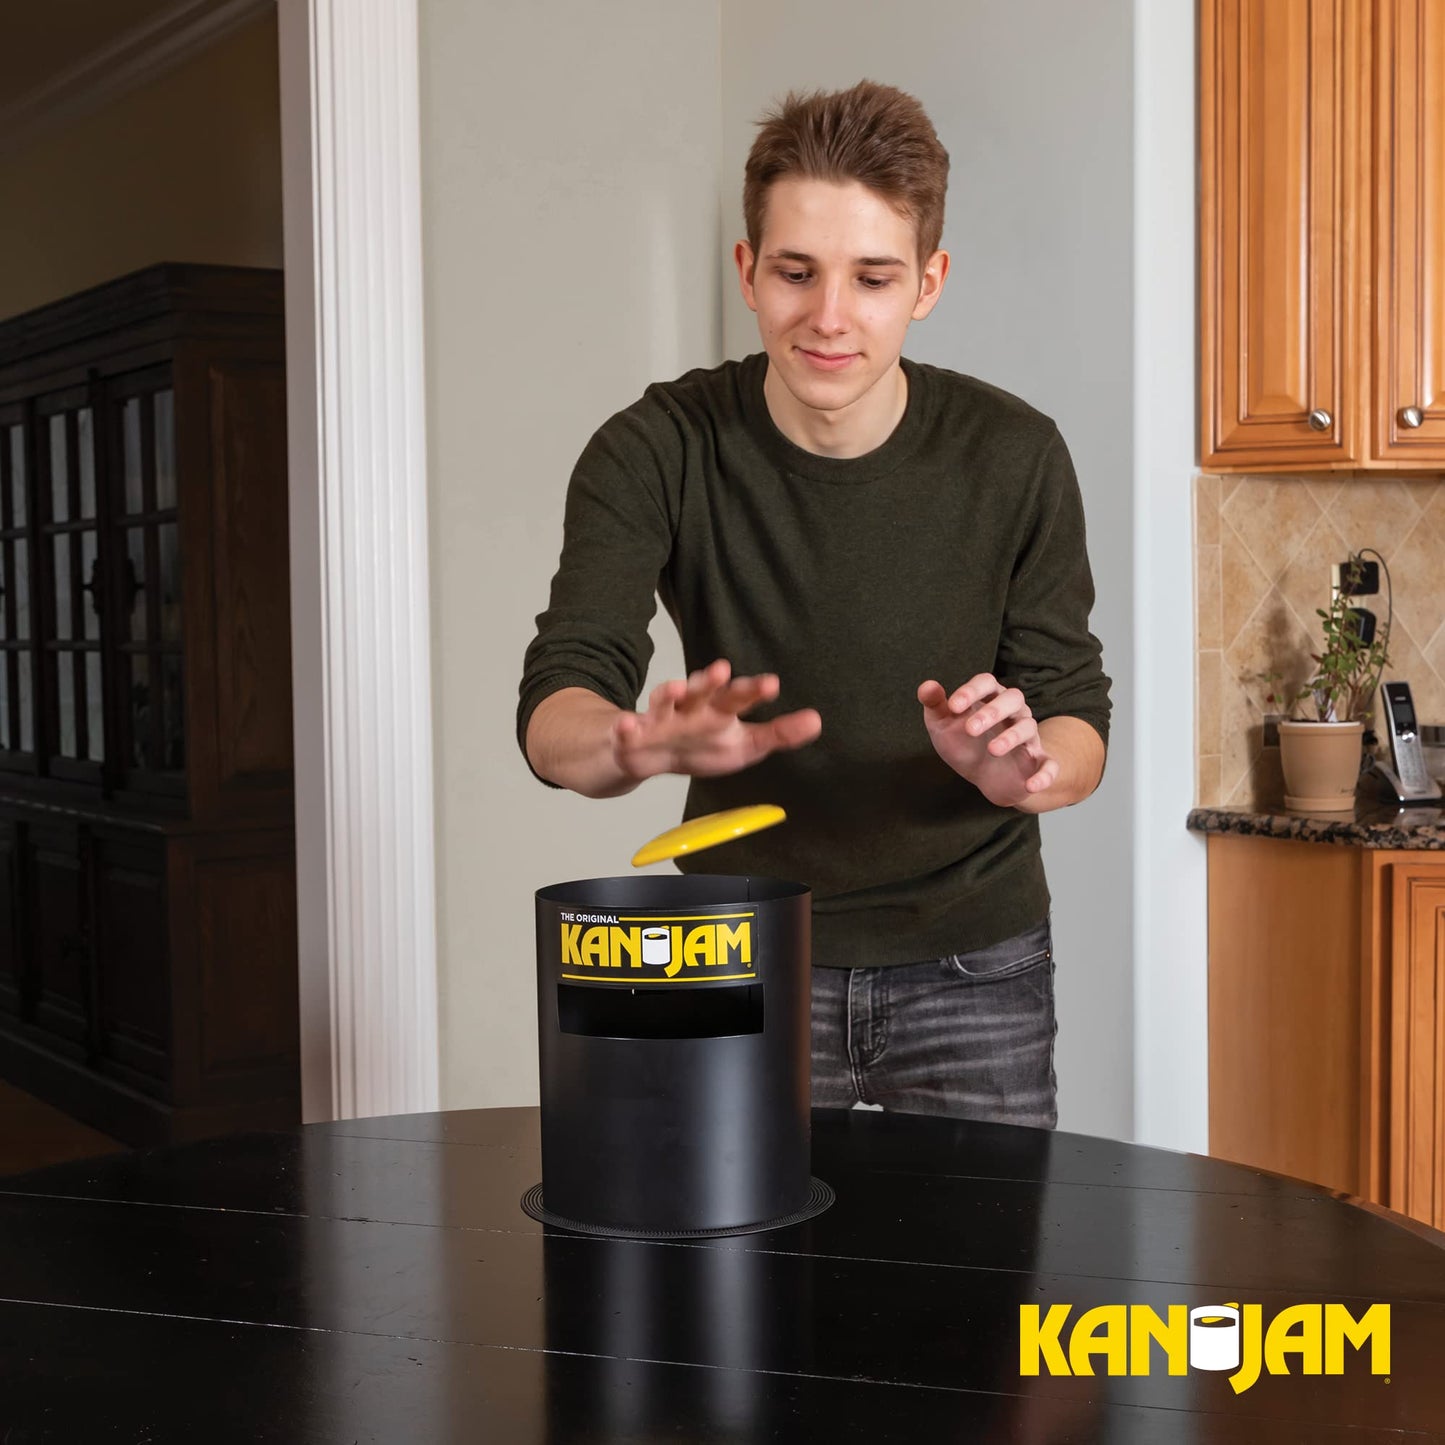 Kan Jam Mini - The Original Backyard Outdoor Game now in a Smaller Indoor Size - Complete with 2 Targets and 1 Mini Disc